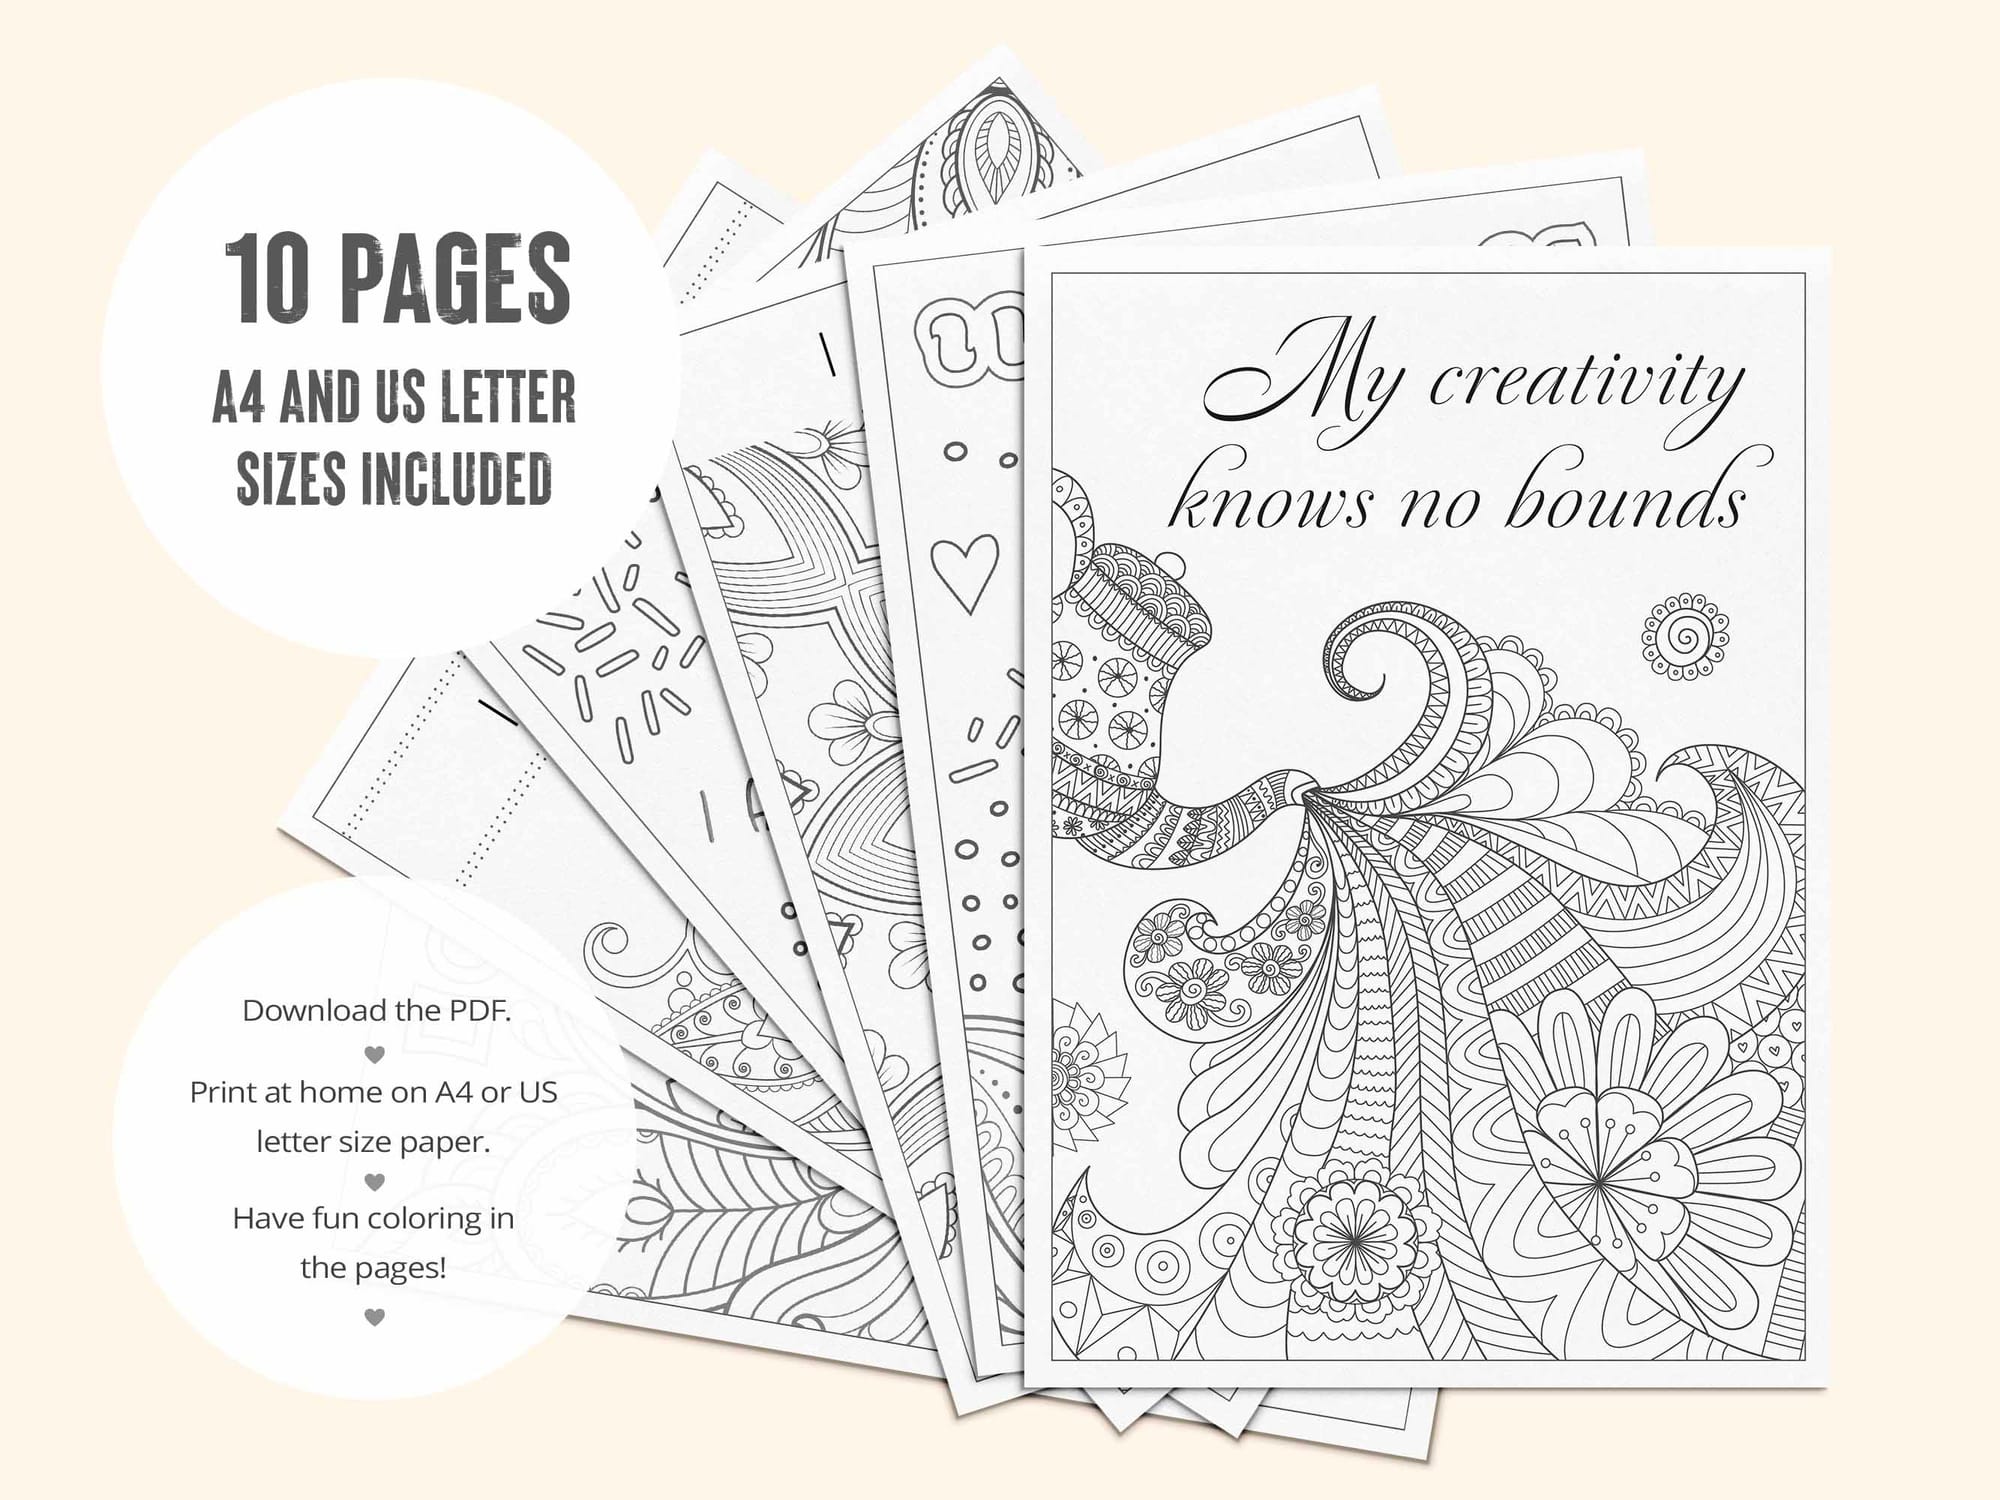 Printable PDF coloring pages. Print on A4 or US Letter paper.